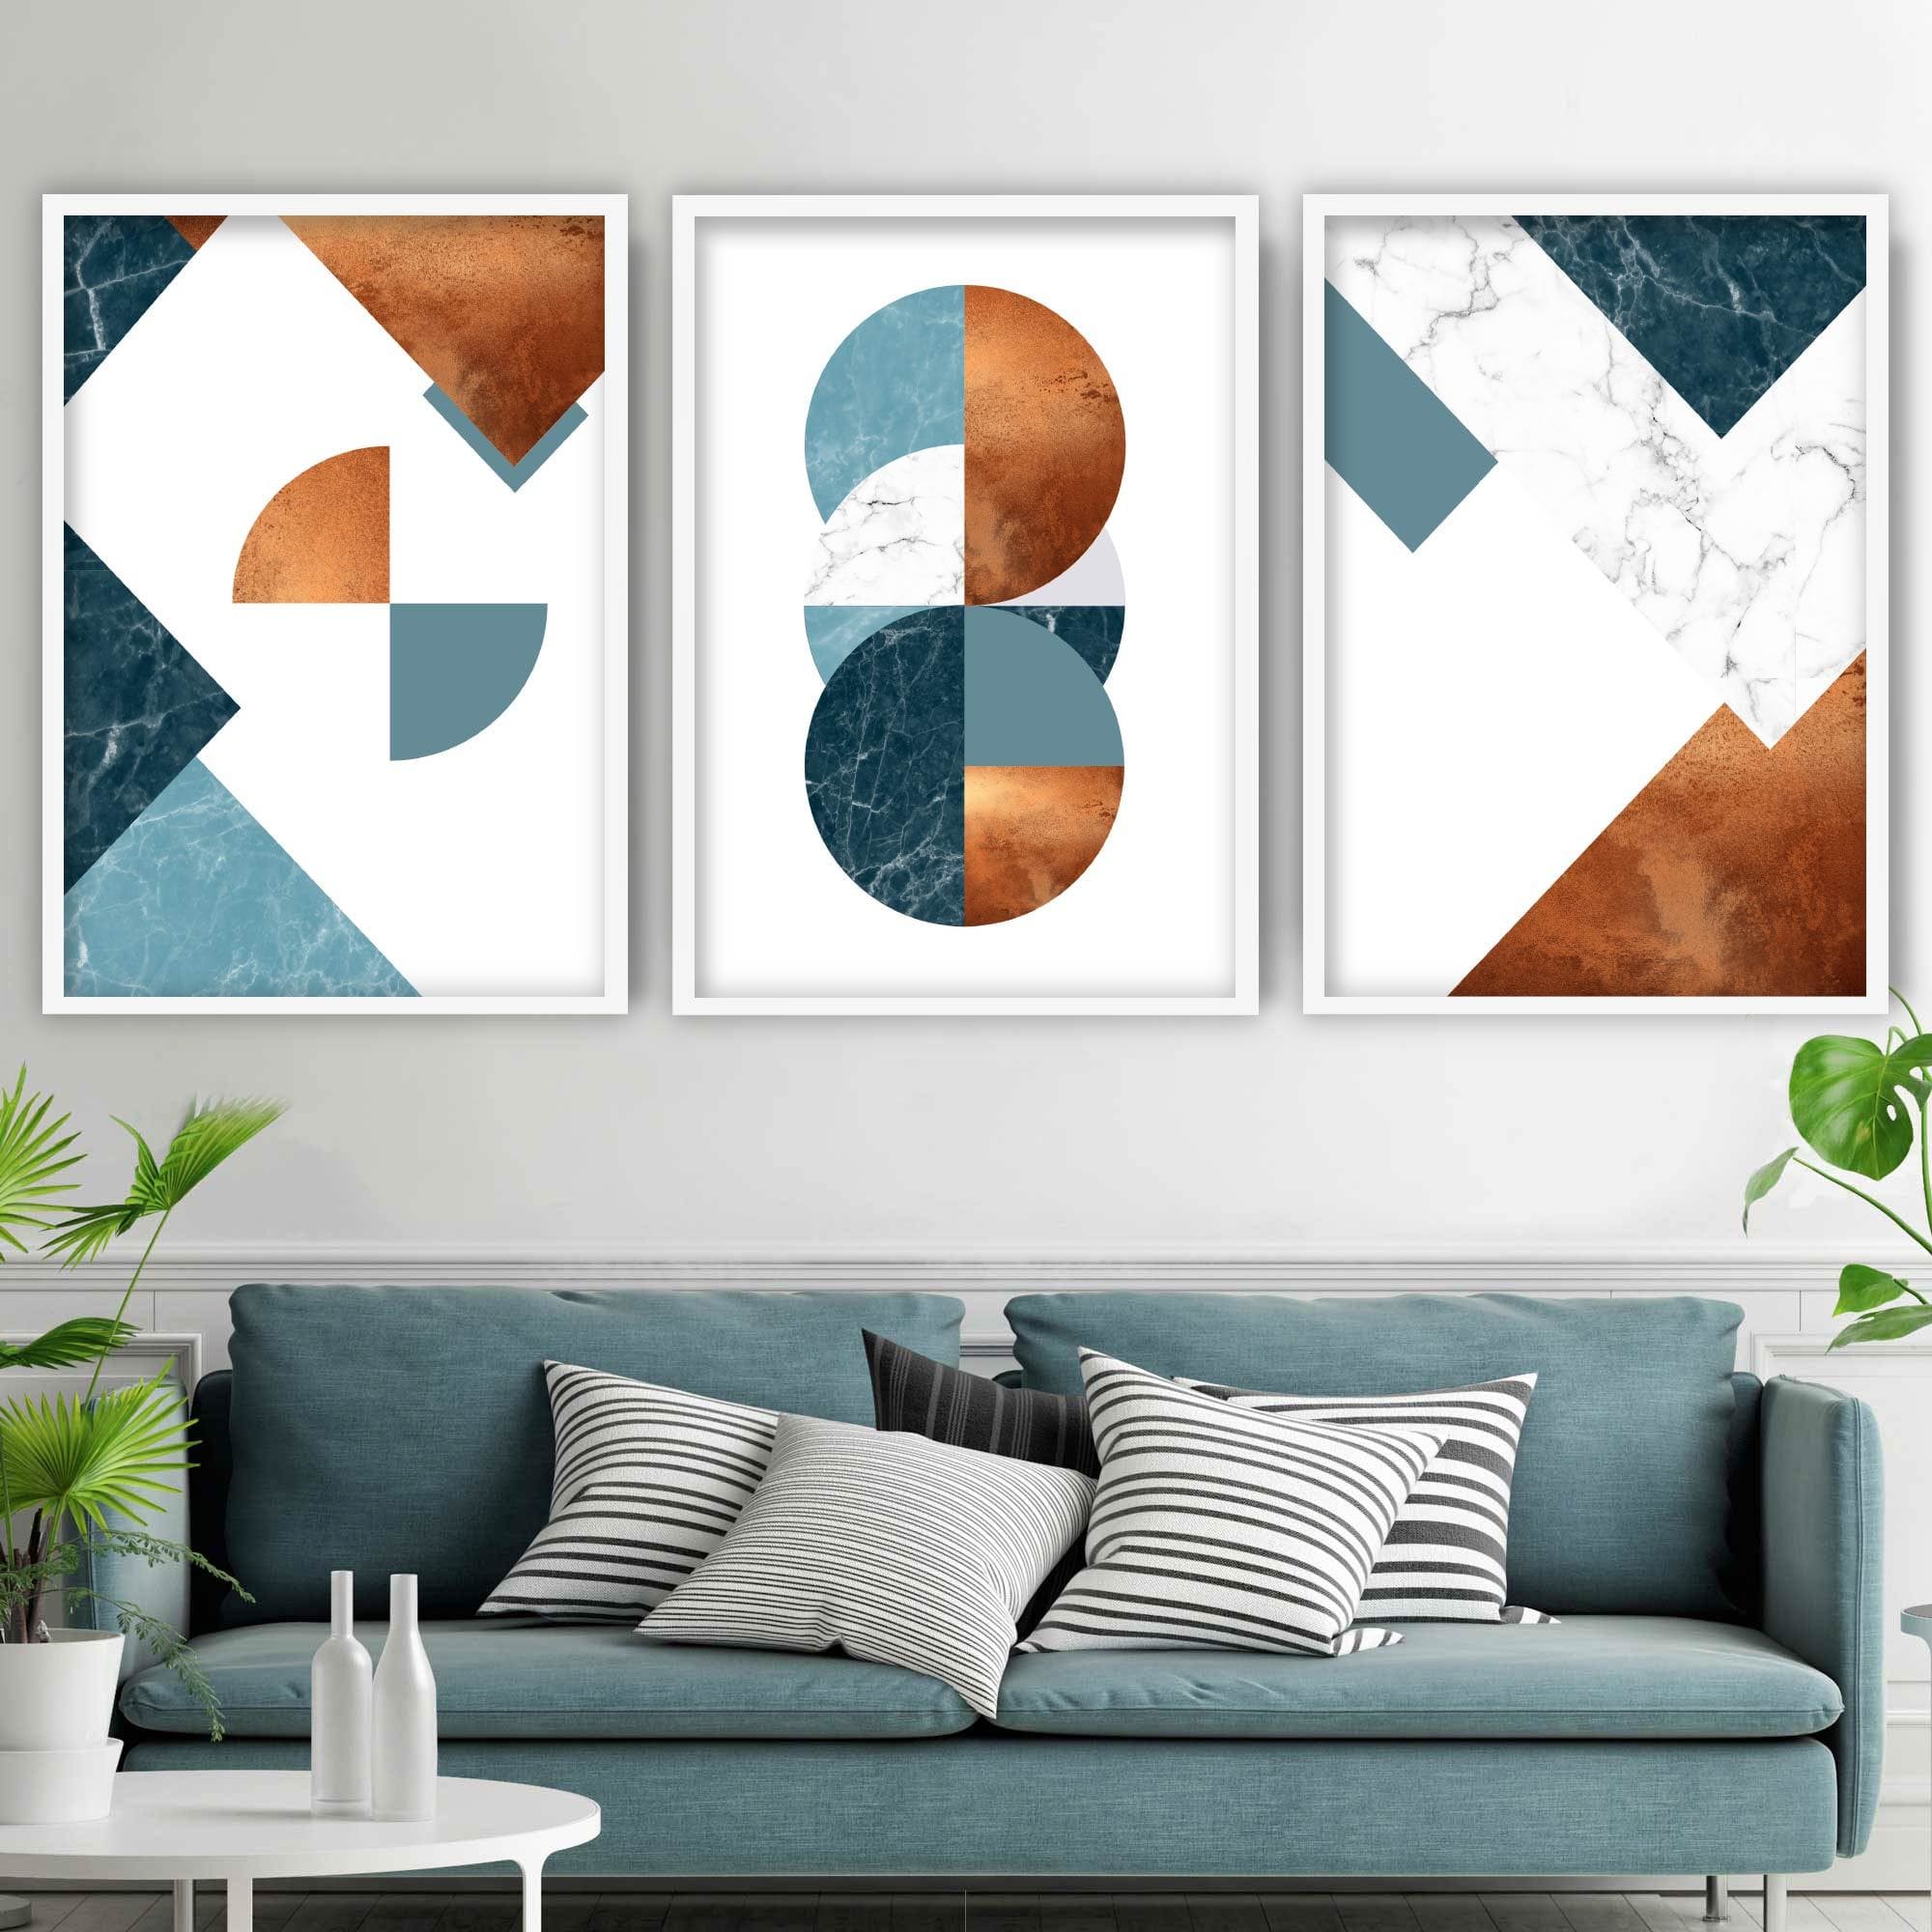 GEOMETRIC set of 3 Teal Blue Orange Art Prints Abstract Textured Circles Triangles